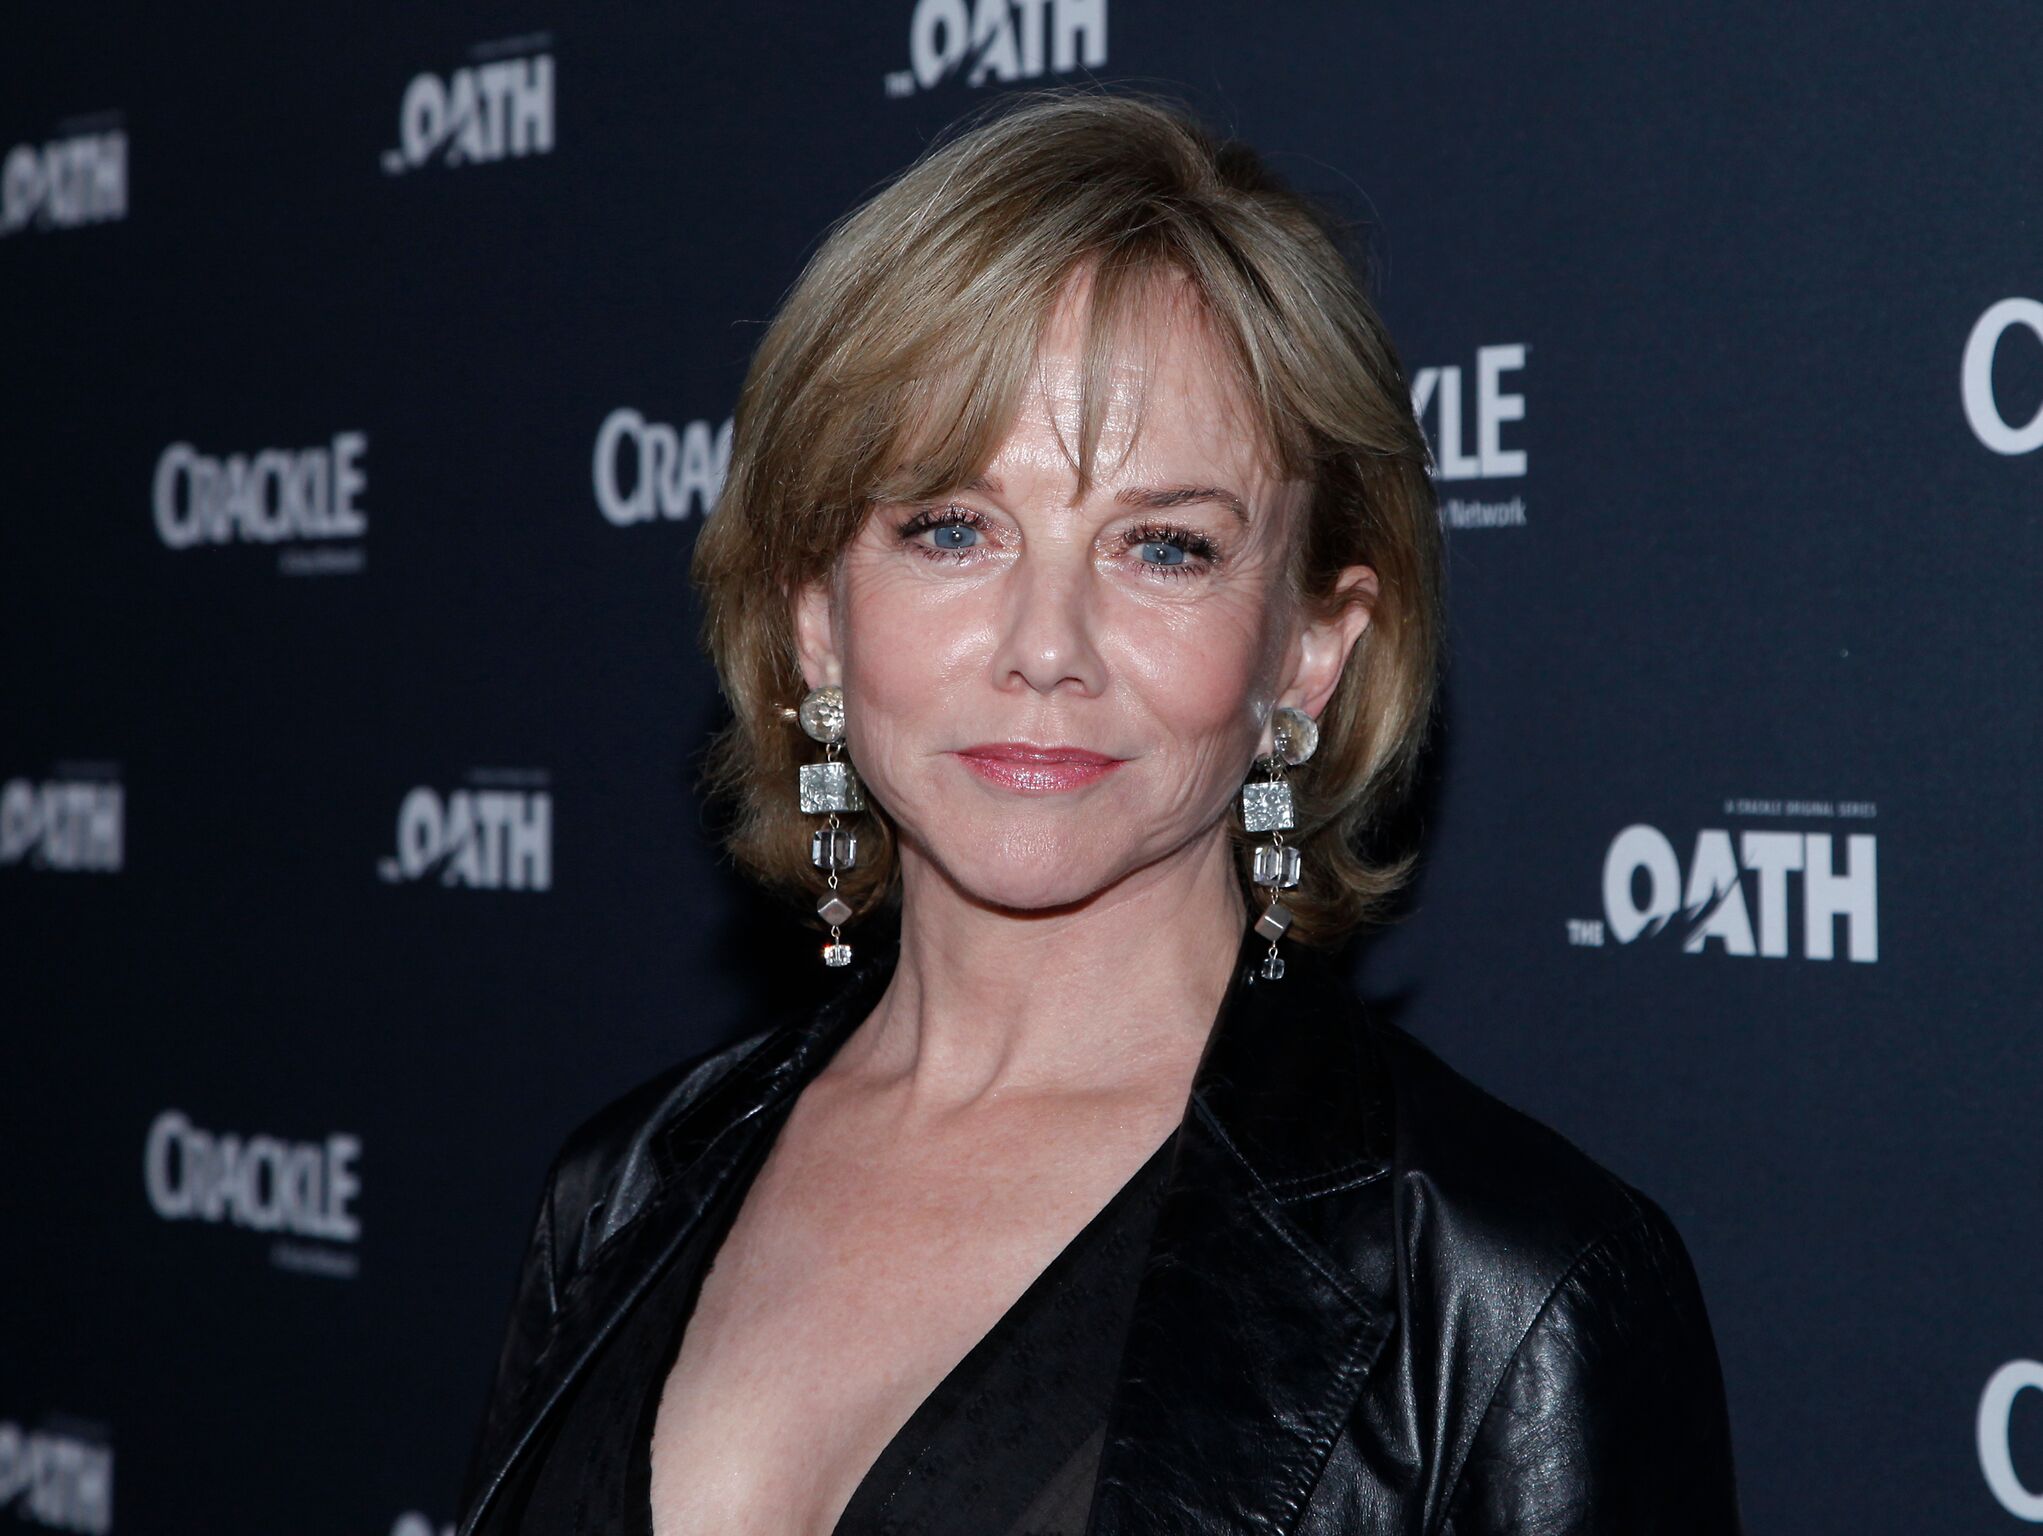 Linda Purl attends the premiere of Crackle's 'The Oath' at Sony Pictures Studios  | Photo: Getty Images